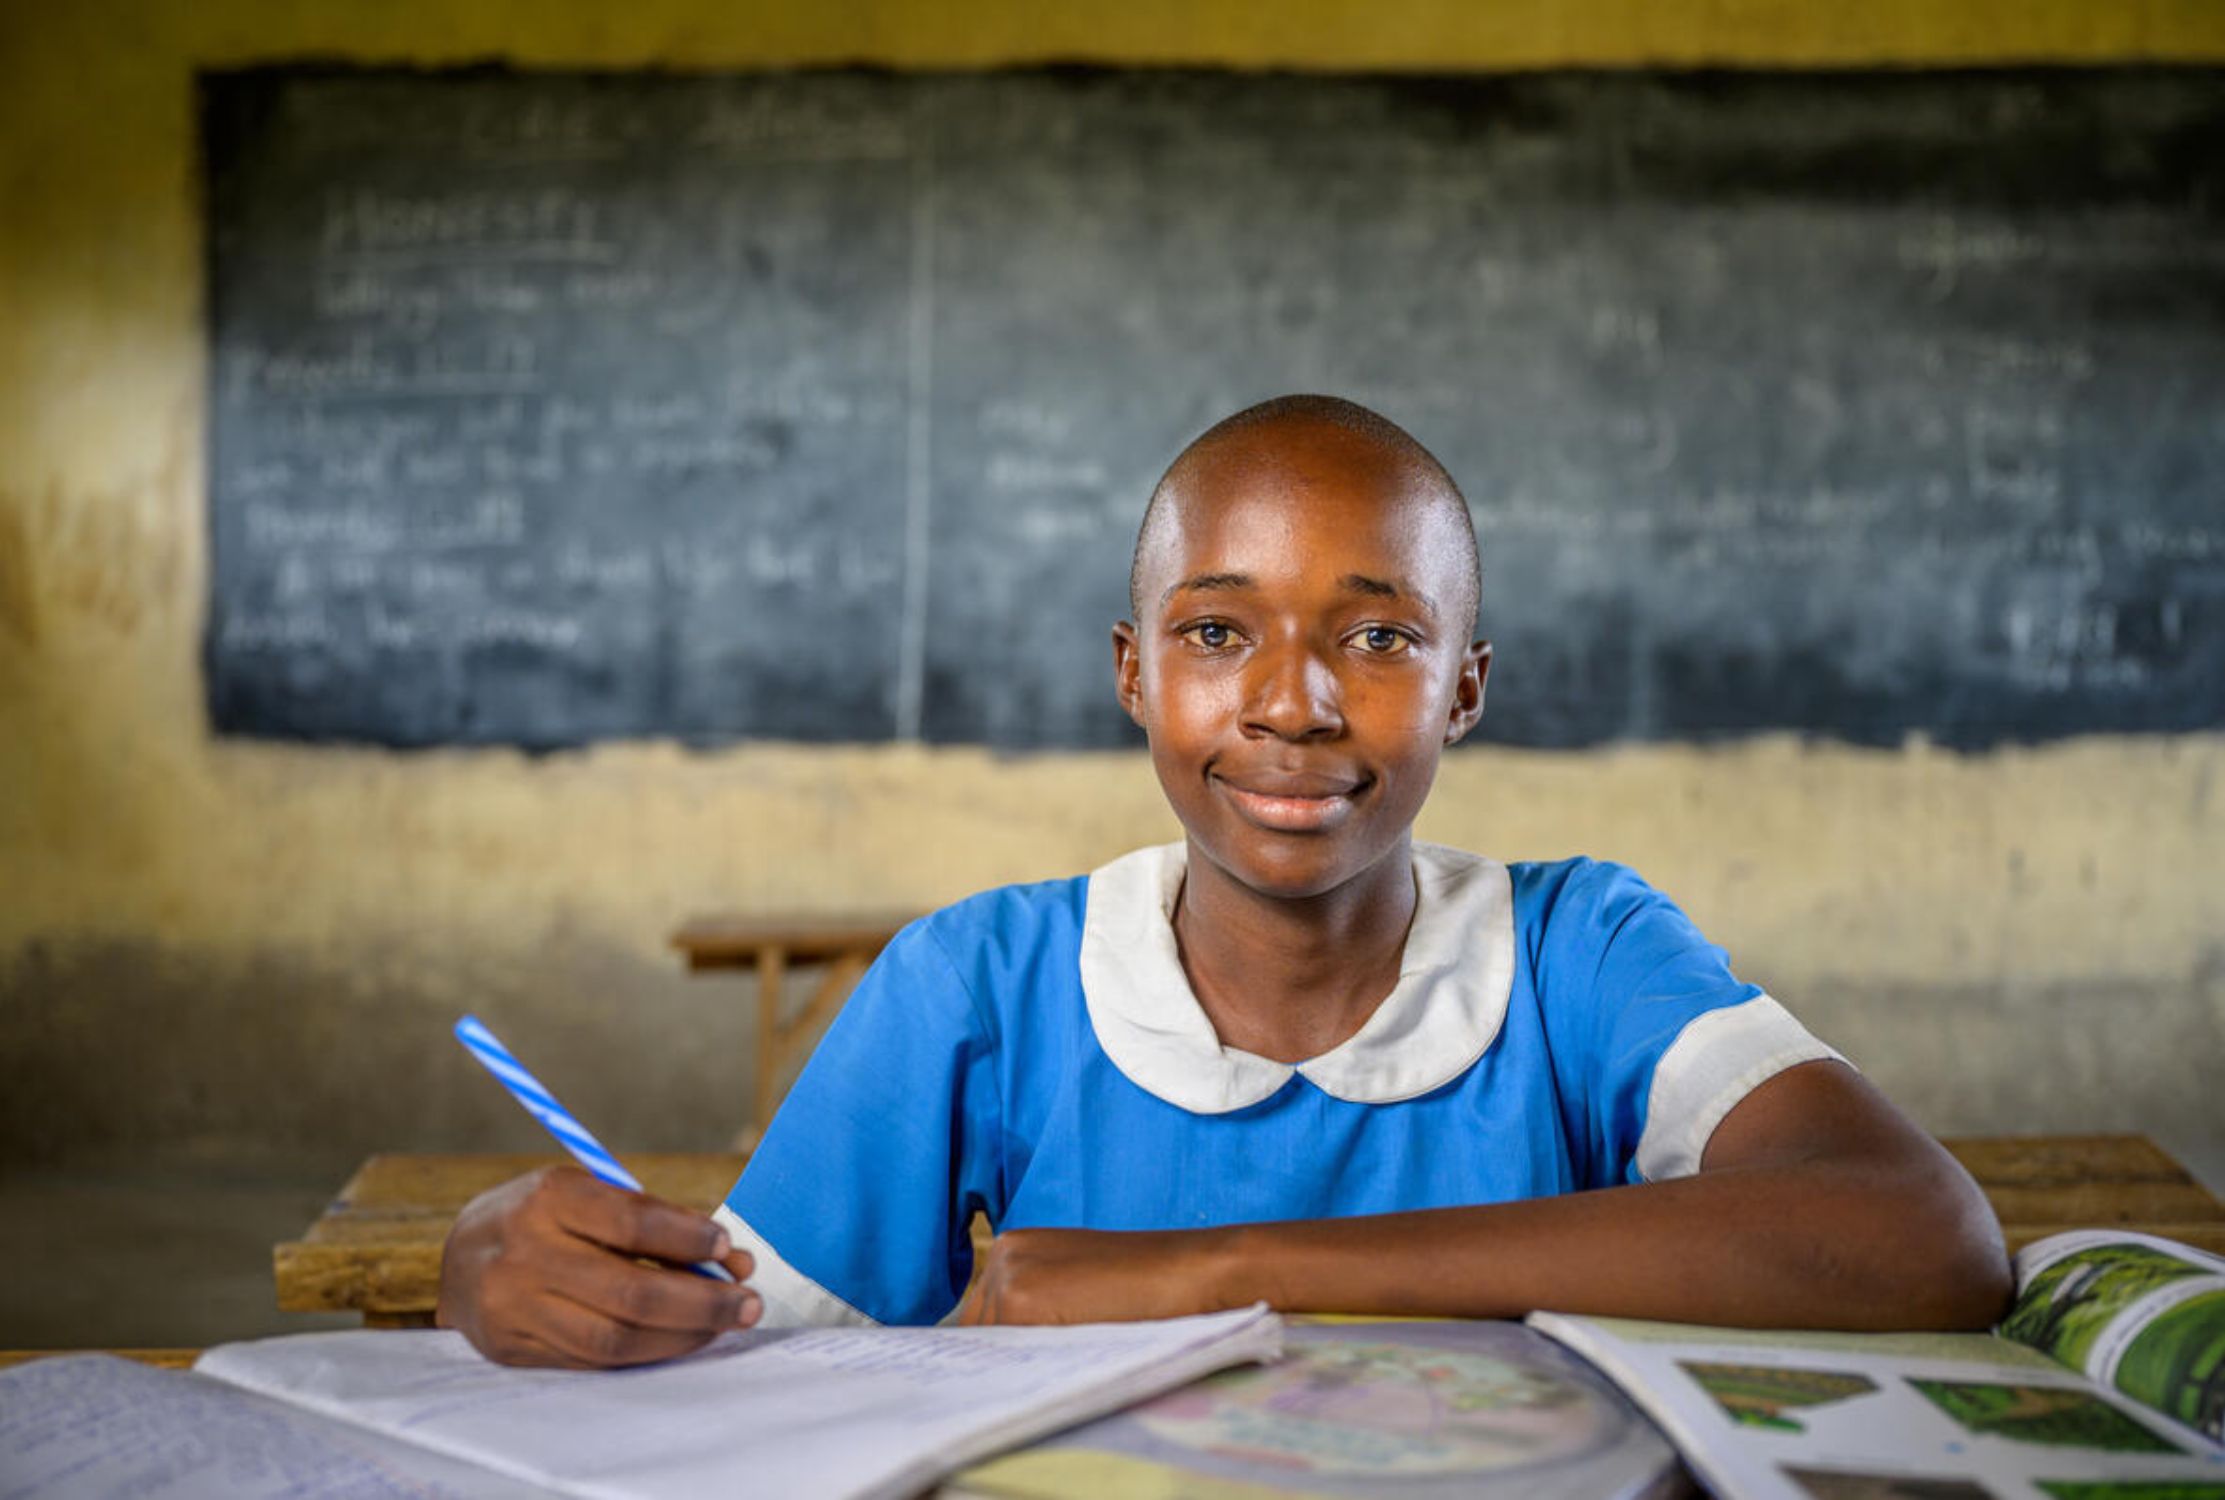 A Kenyan girl sat at desk in a school classroom, holding a pen to write in her books